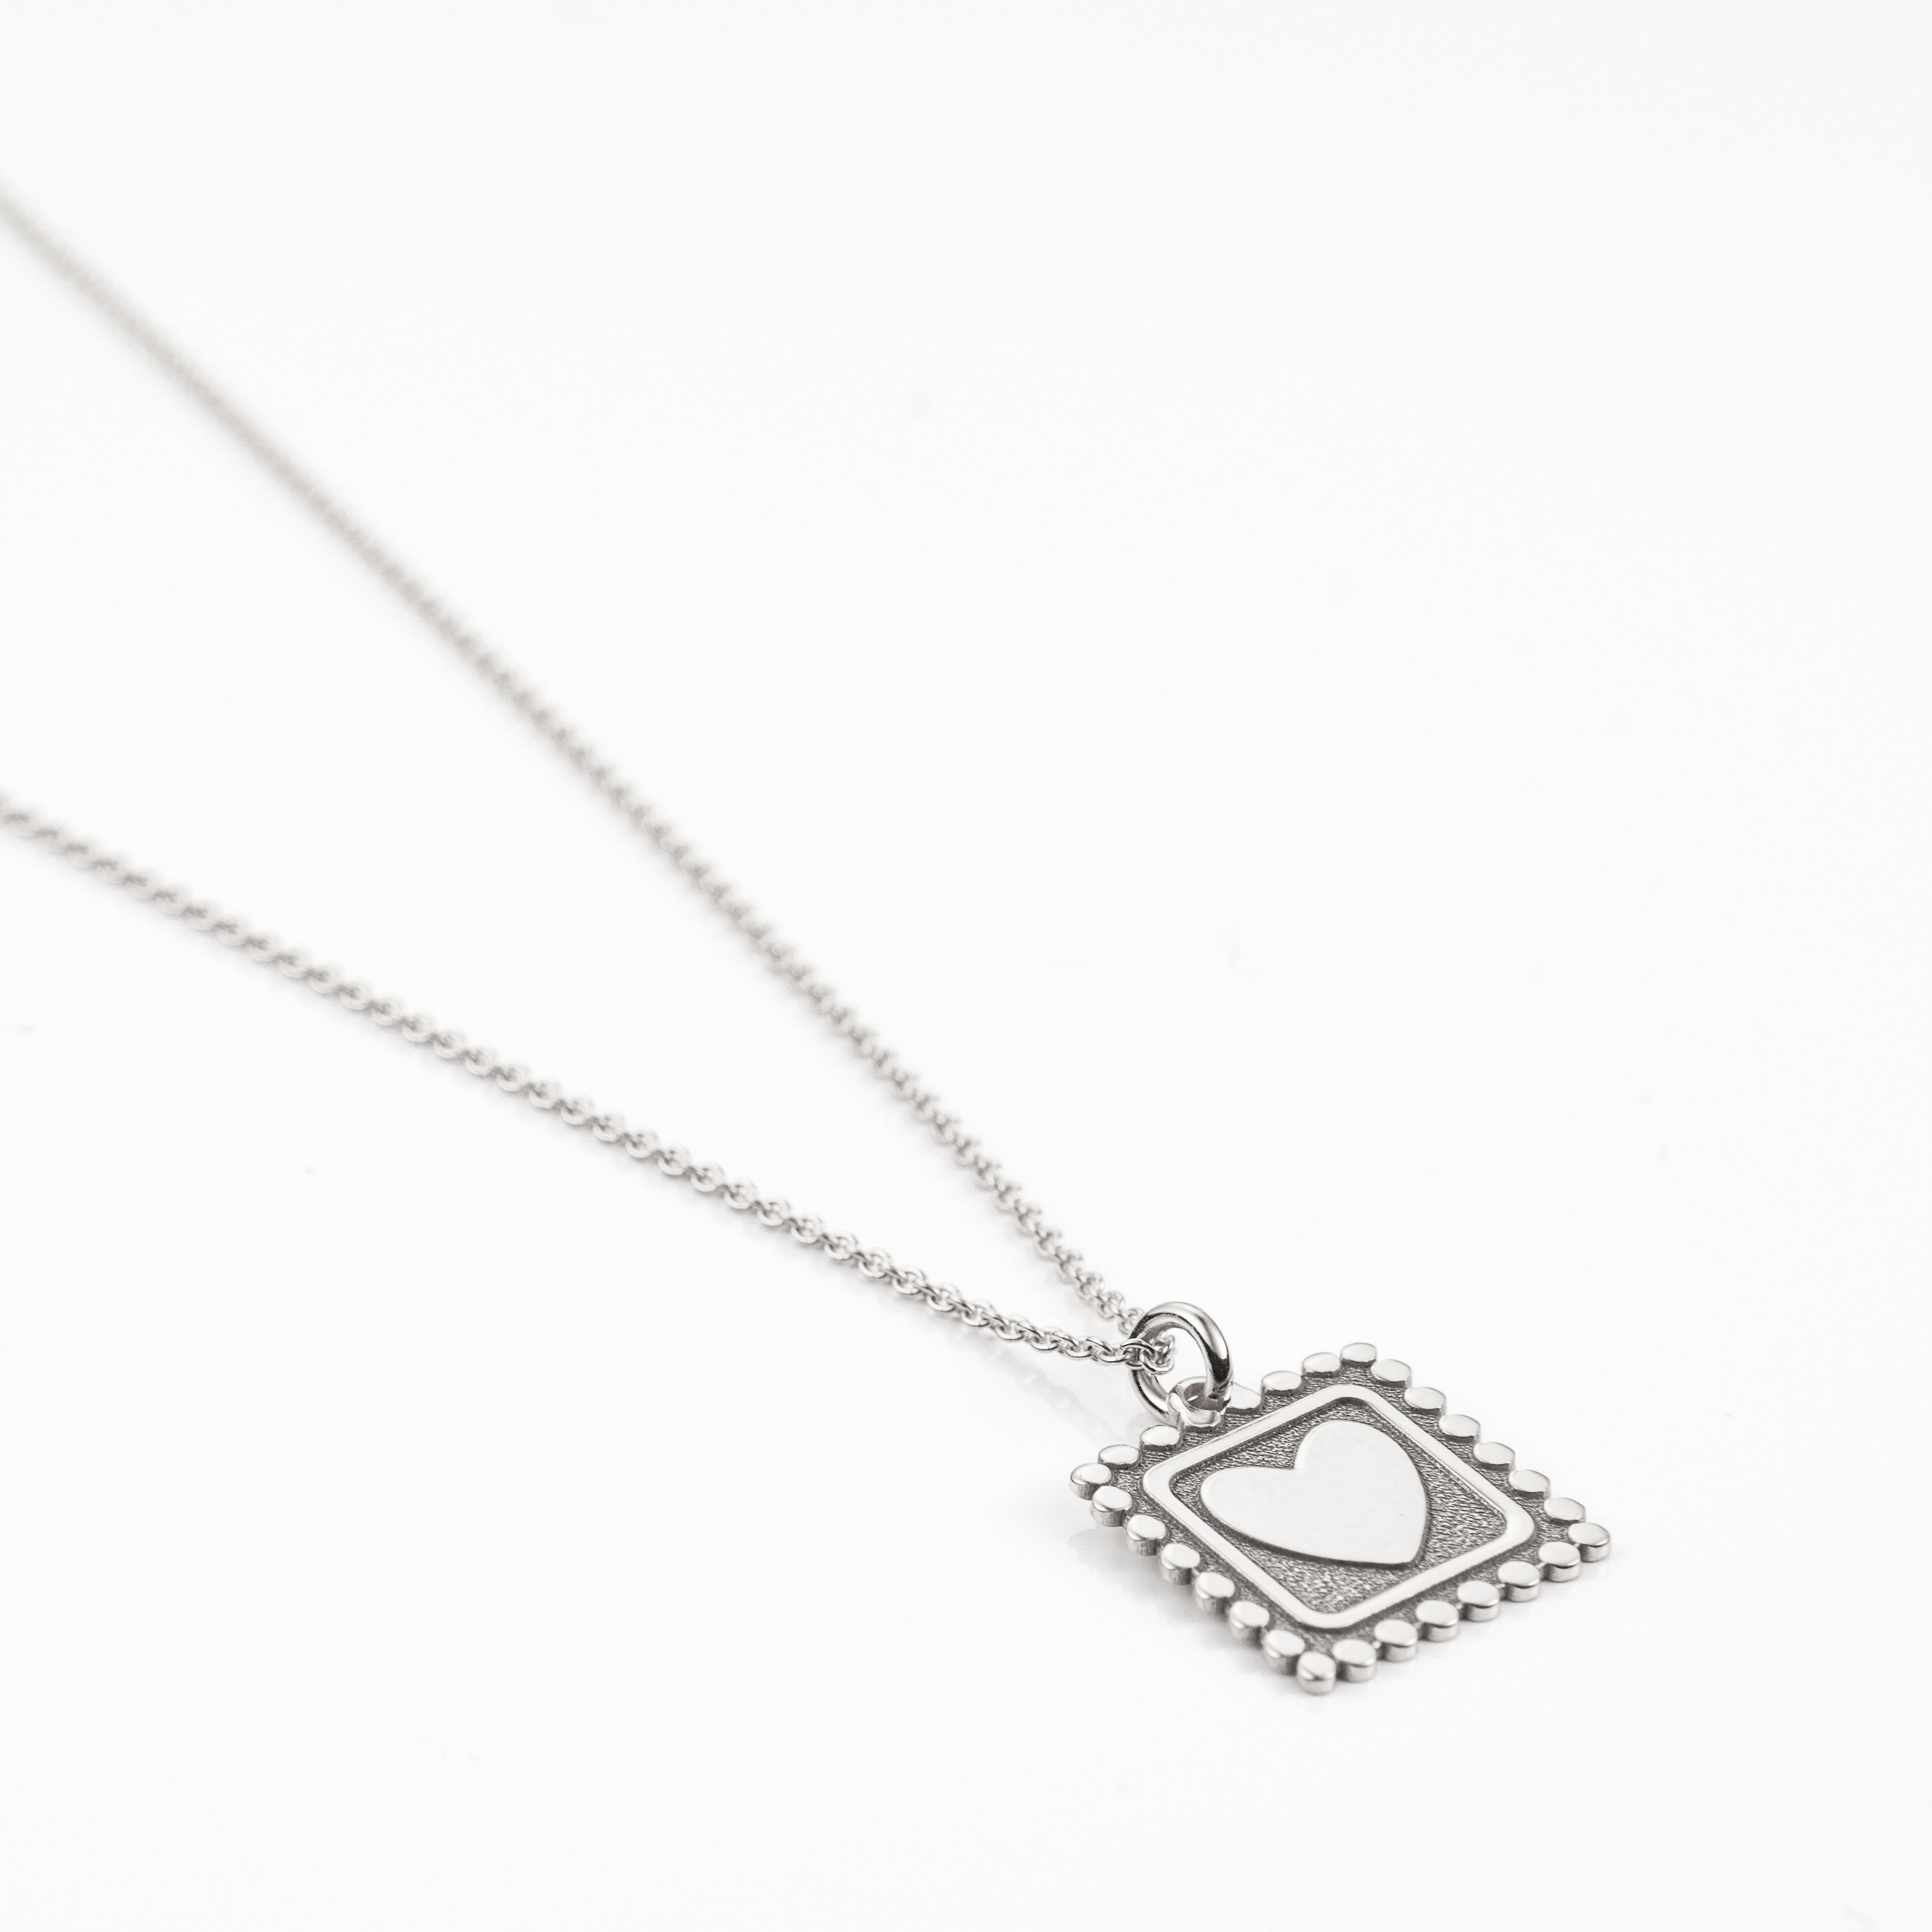 Lost in Love Necklace, silver 925